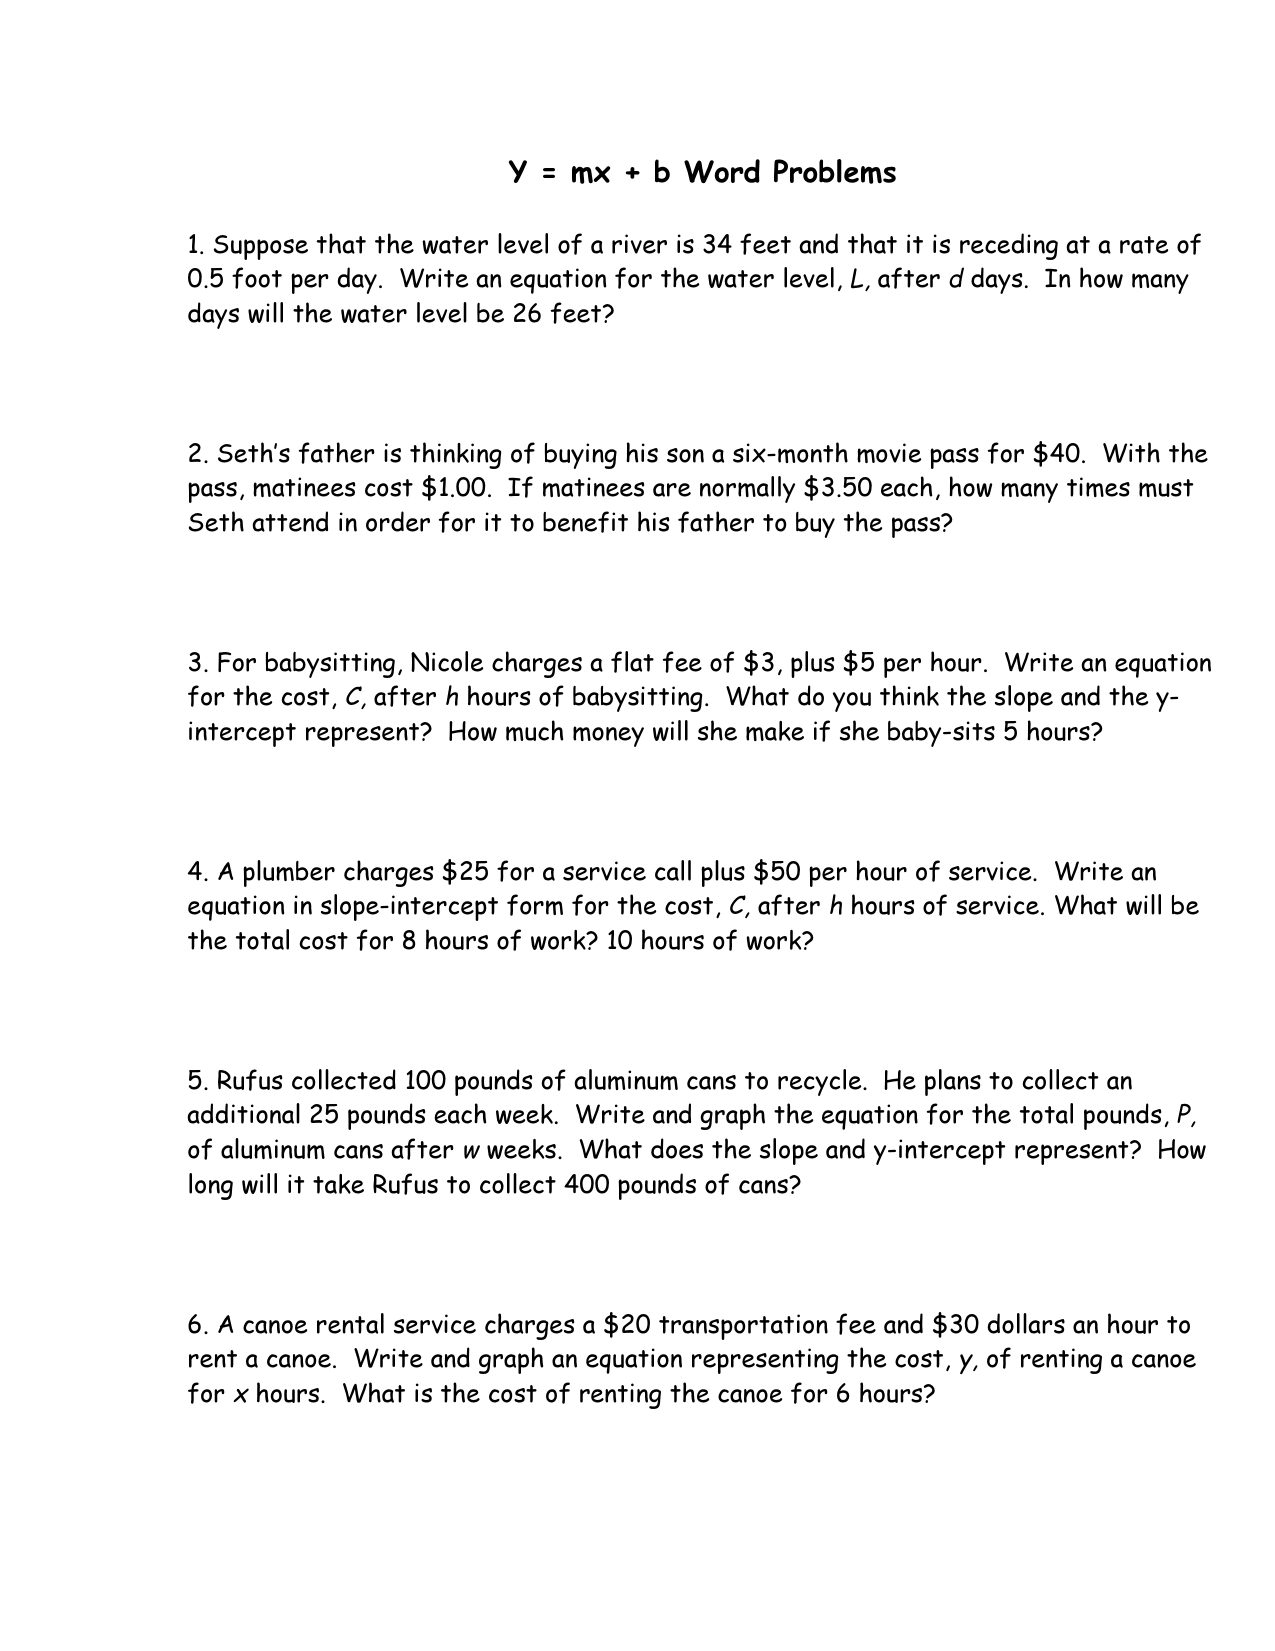 Linear Equation Word Problems (Slope-Intercept Form) In Linear Functions Word Problems Worksheet